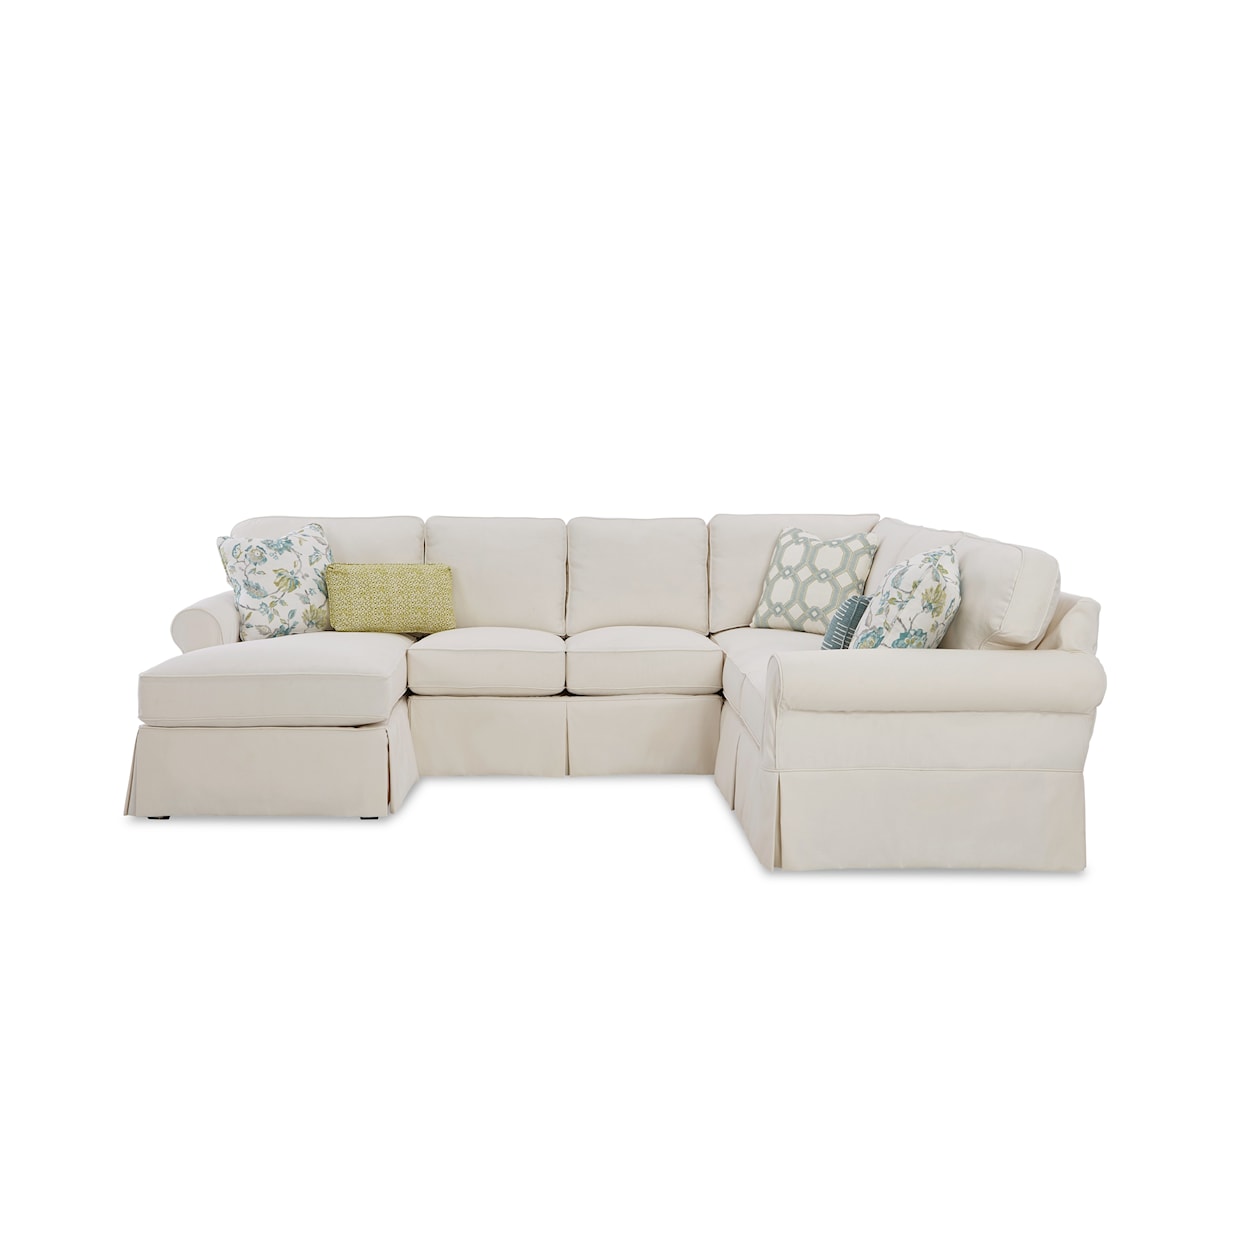 Craftmaster Alyssa 3-Pc Slipcover Sectional Sofa w/ LAF Chaise